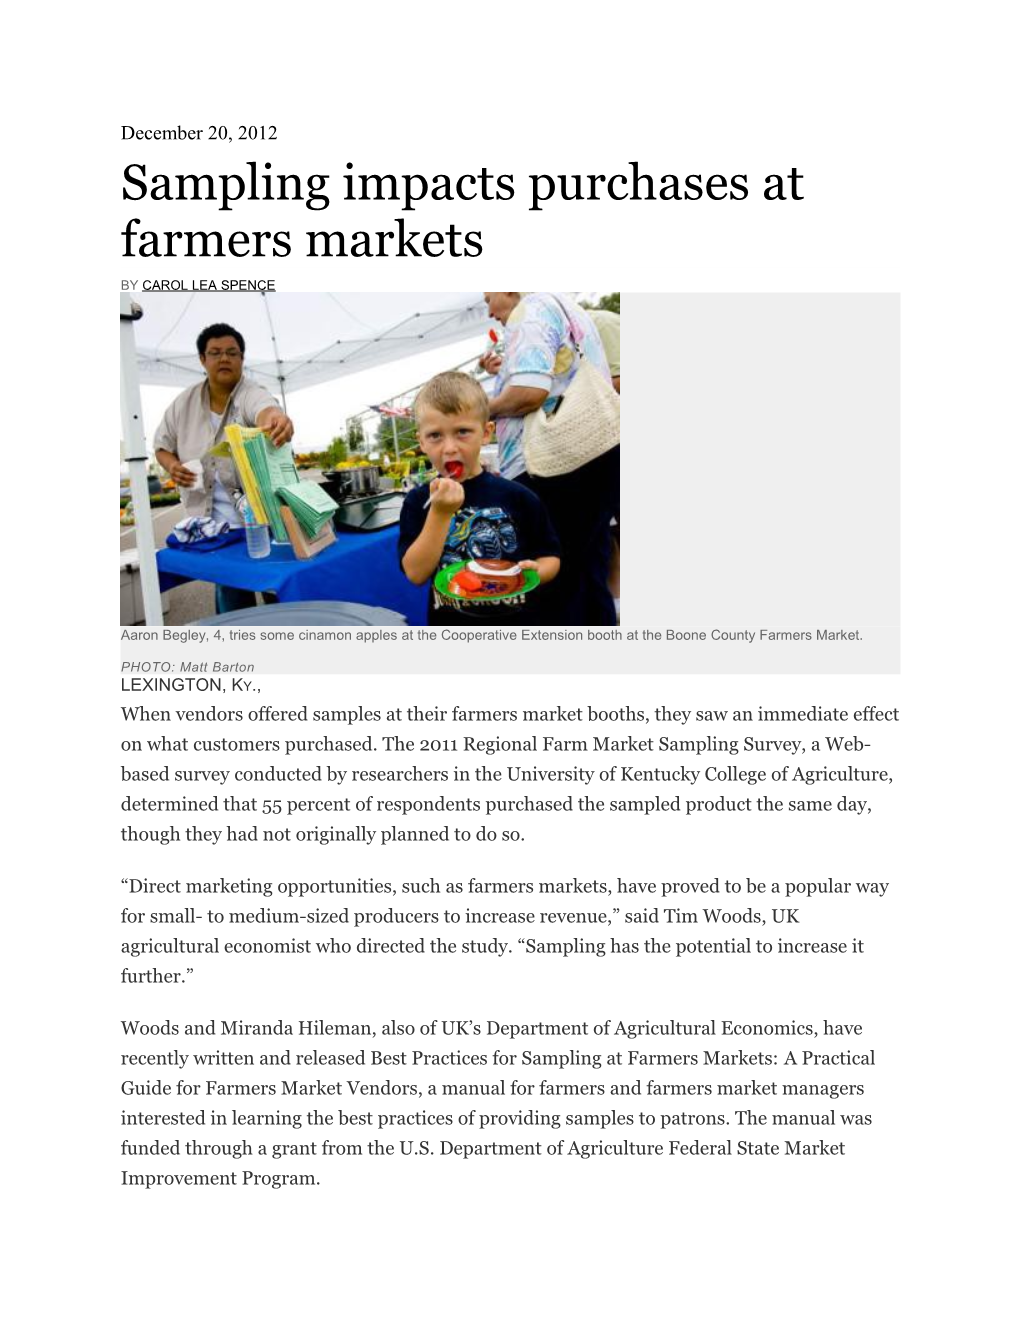 Sampling Impacts Purchases at Farmers Markets